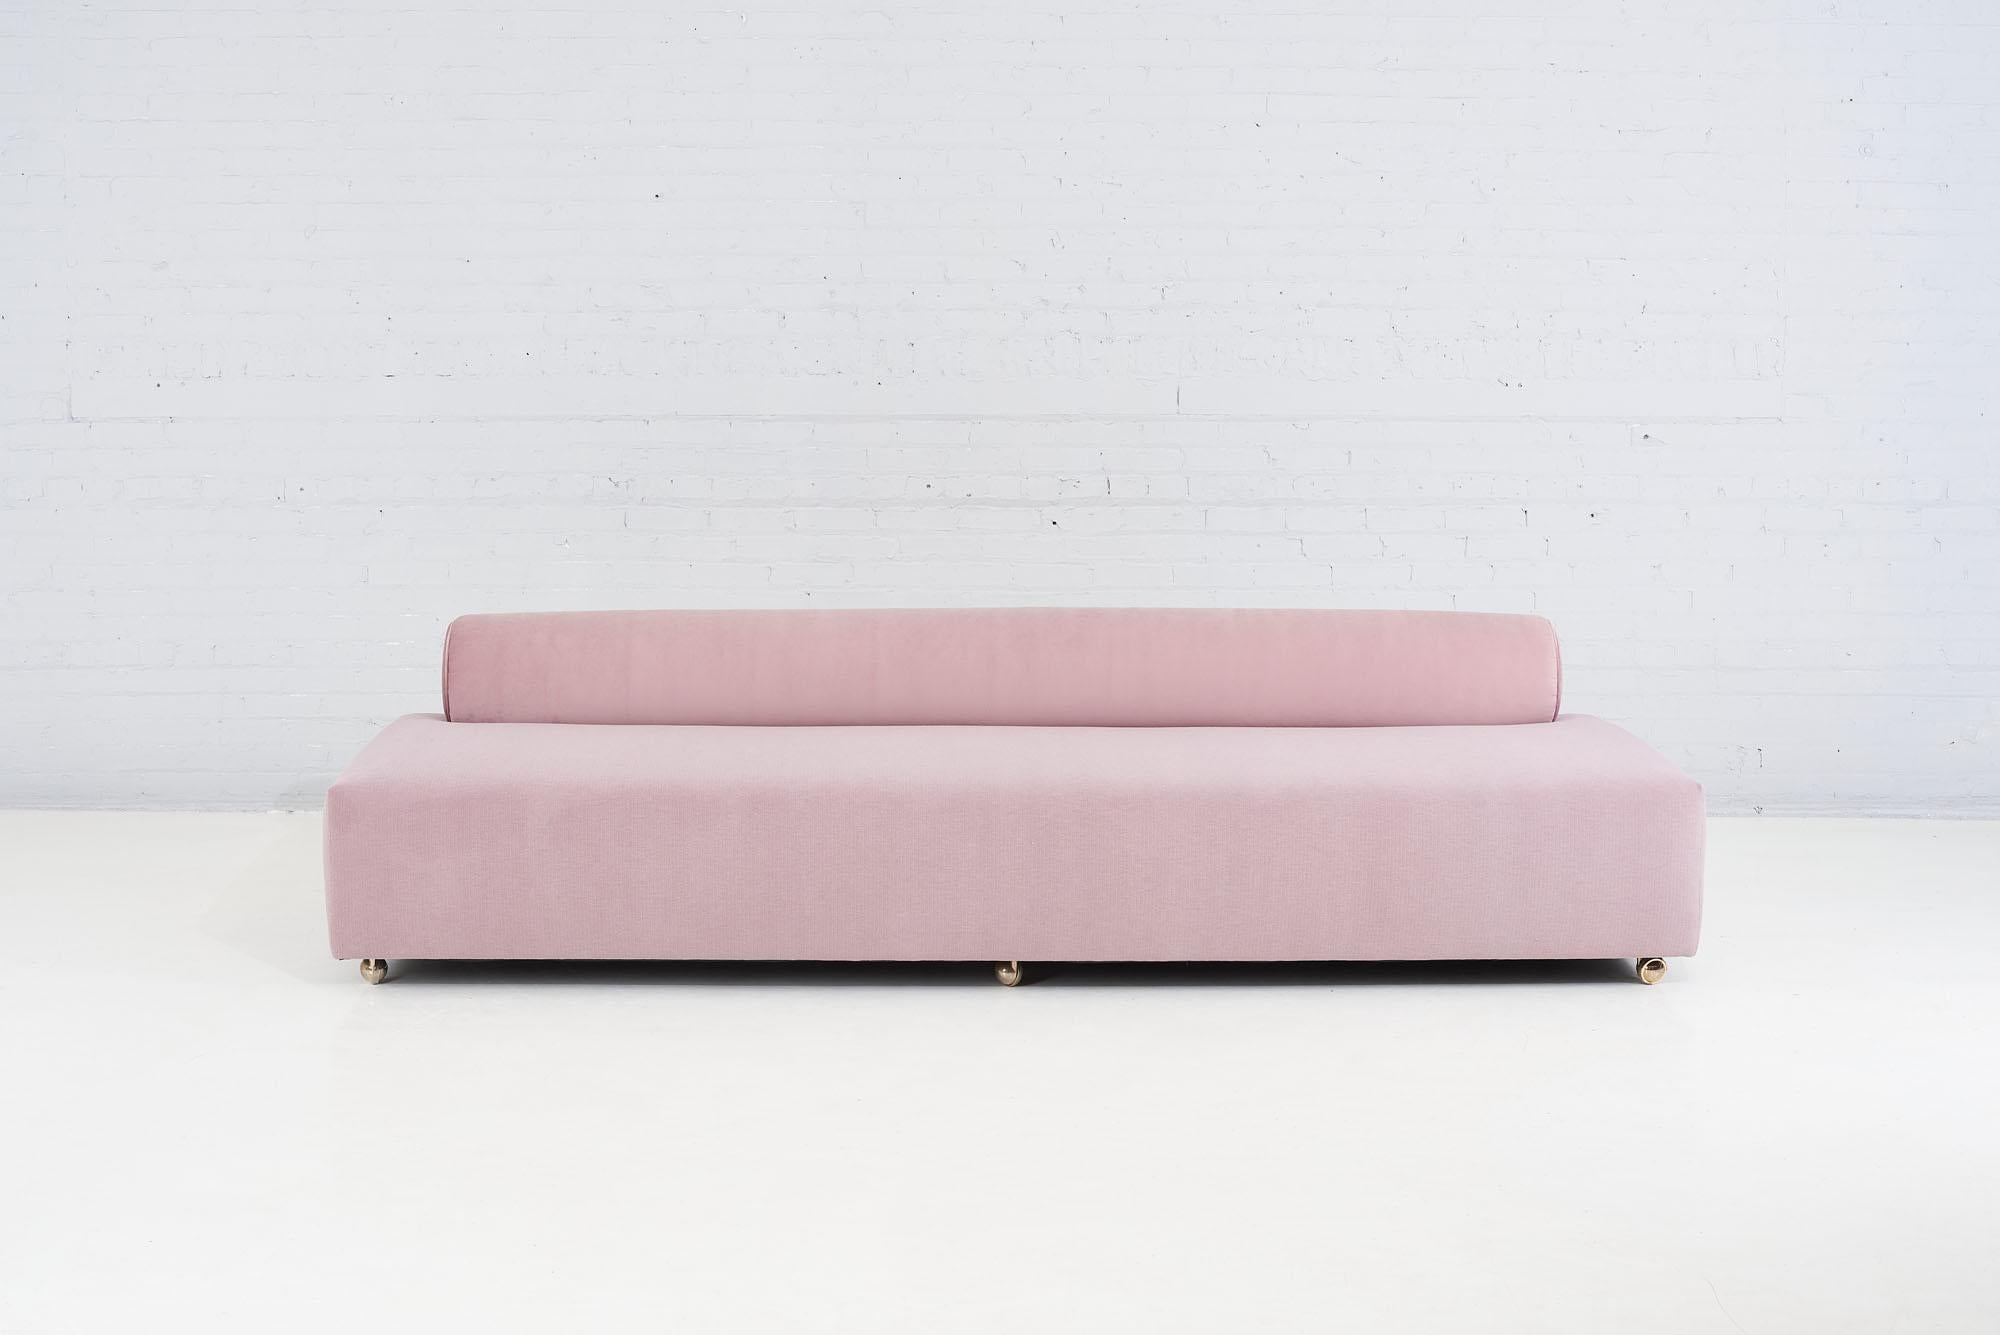 Baker bolster back sofa, 1958. Completely restored and reupholstered with a textured pink mohair seat and a darker tone pink velvet bolster.